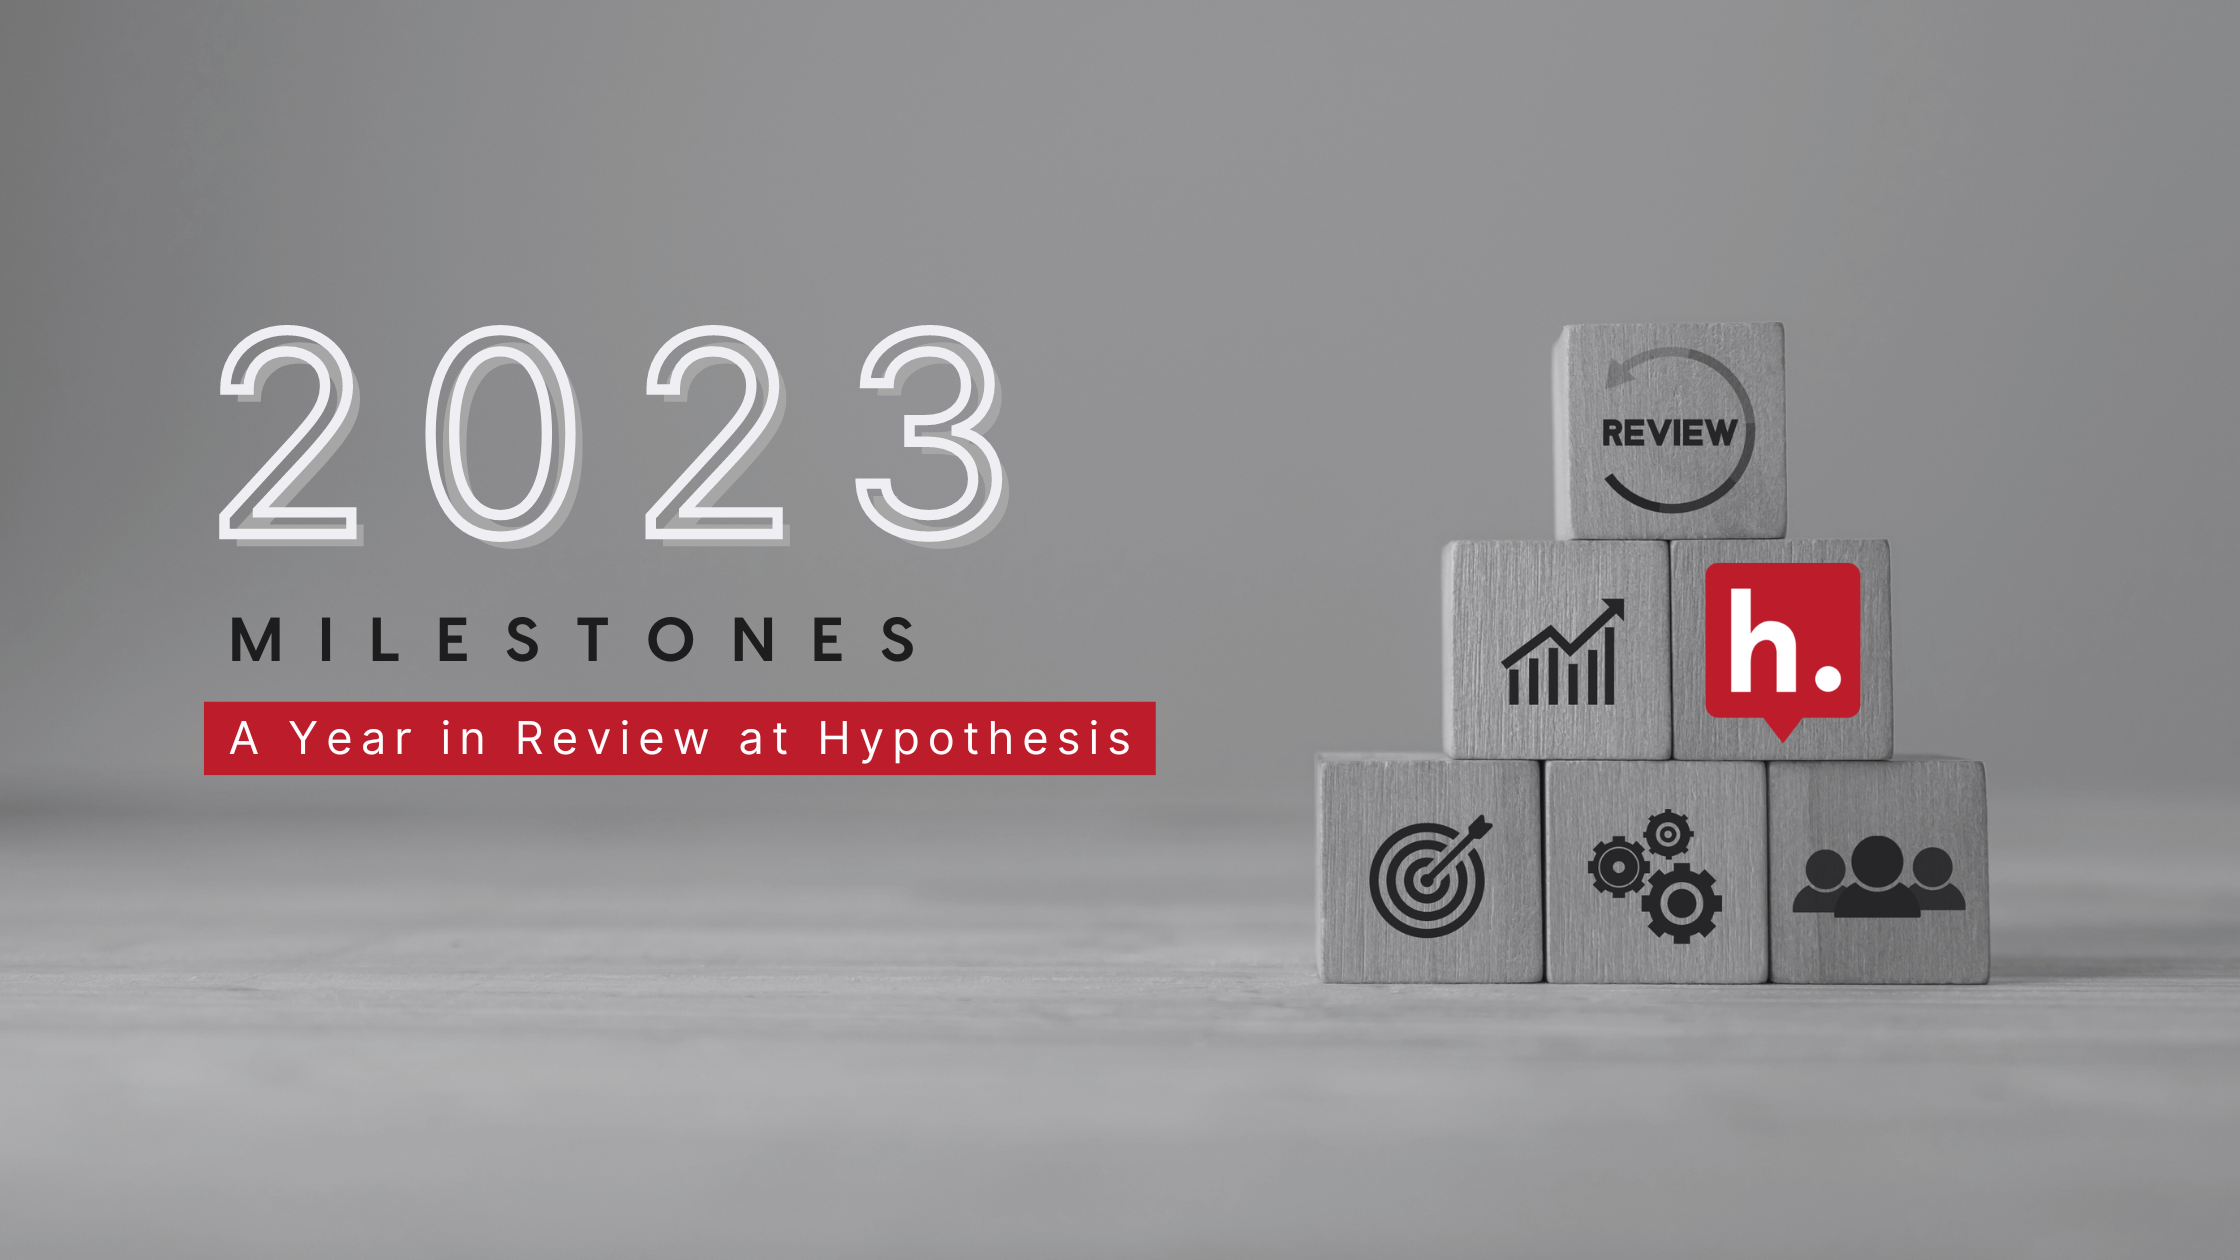 2023 milestones with a black and white background with cubes and a Hypothesis logo.